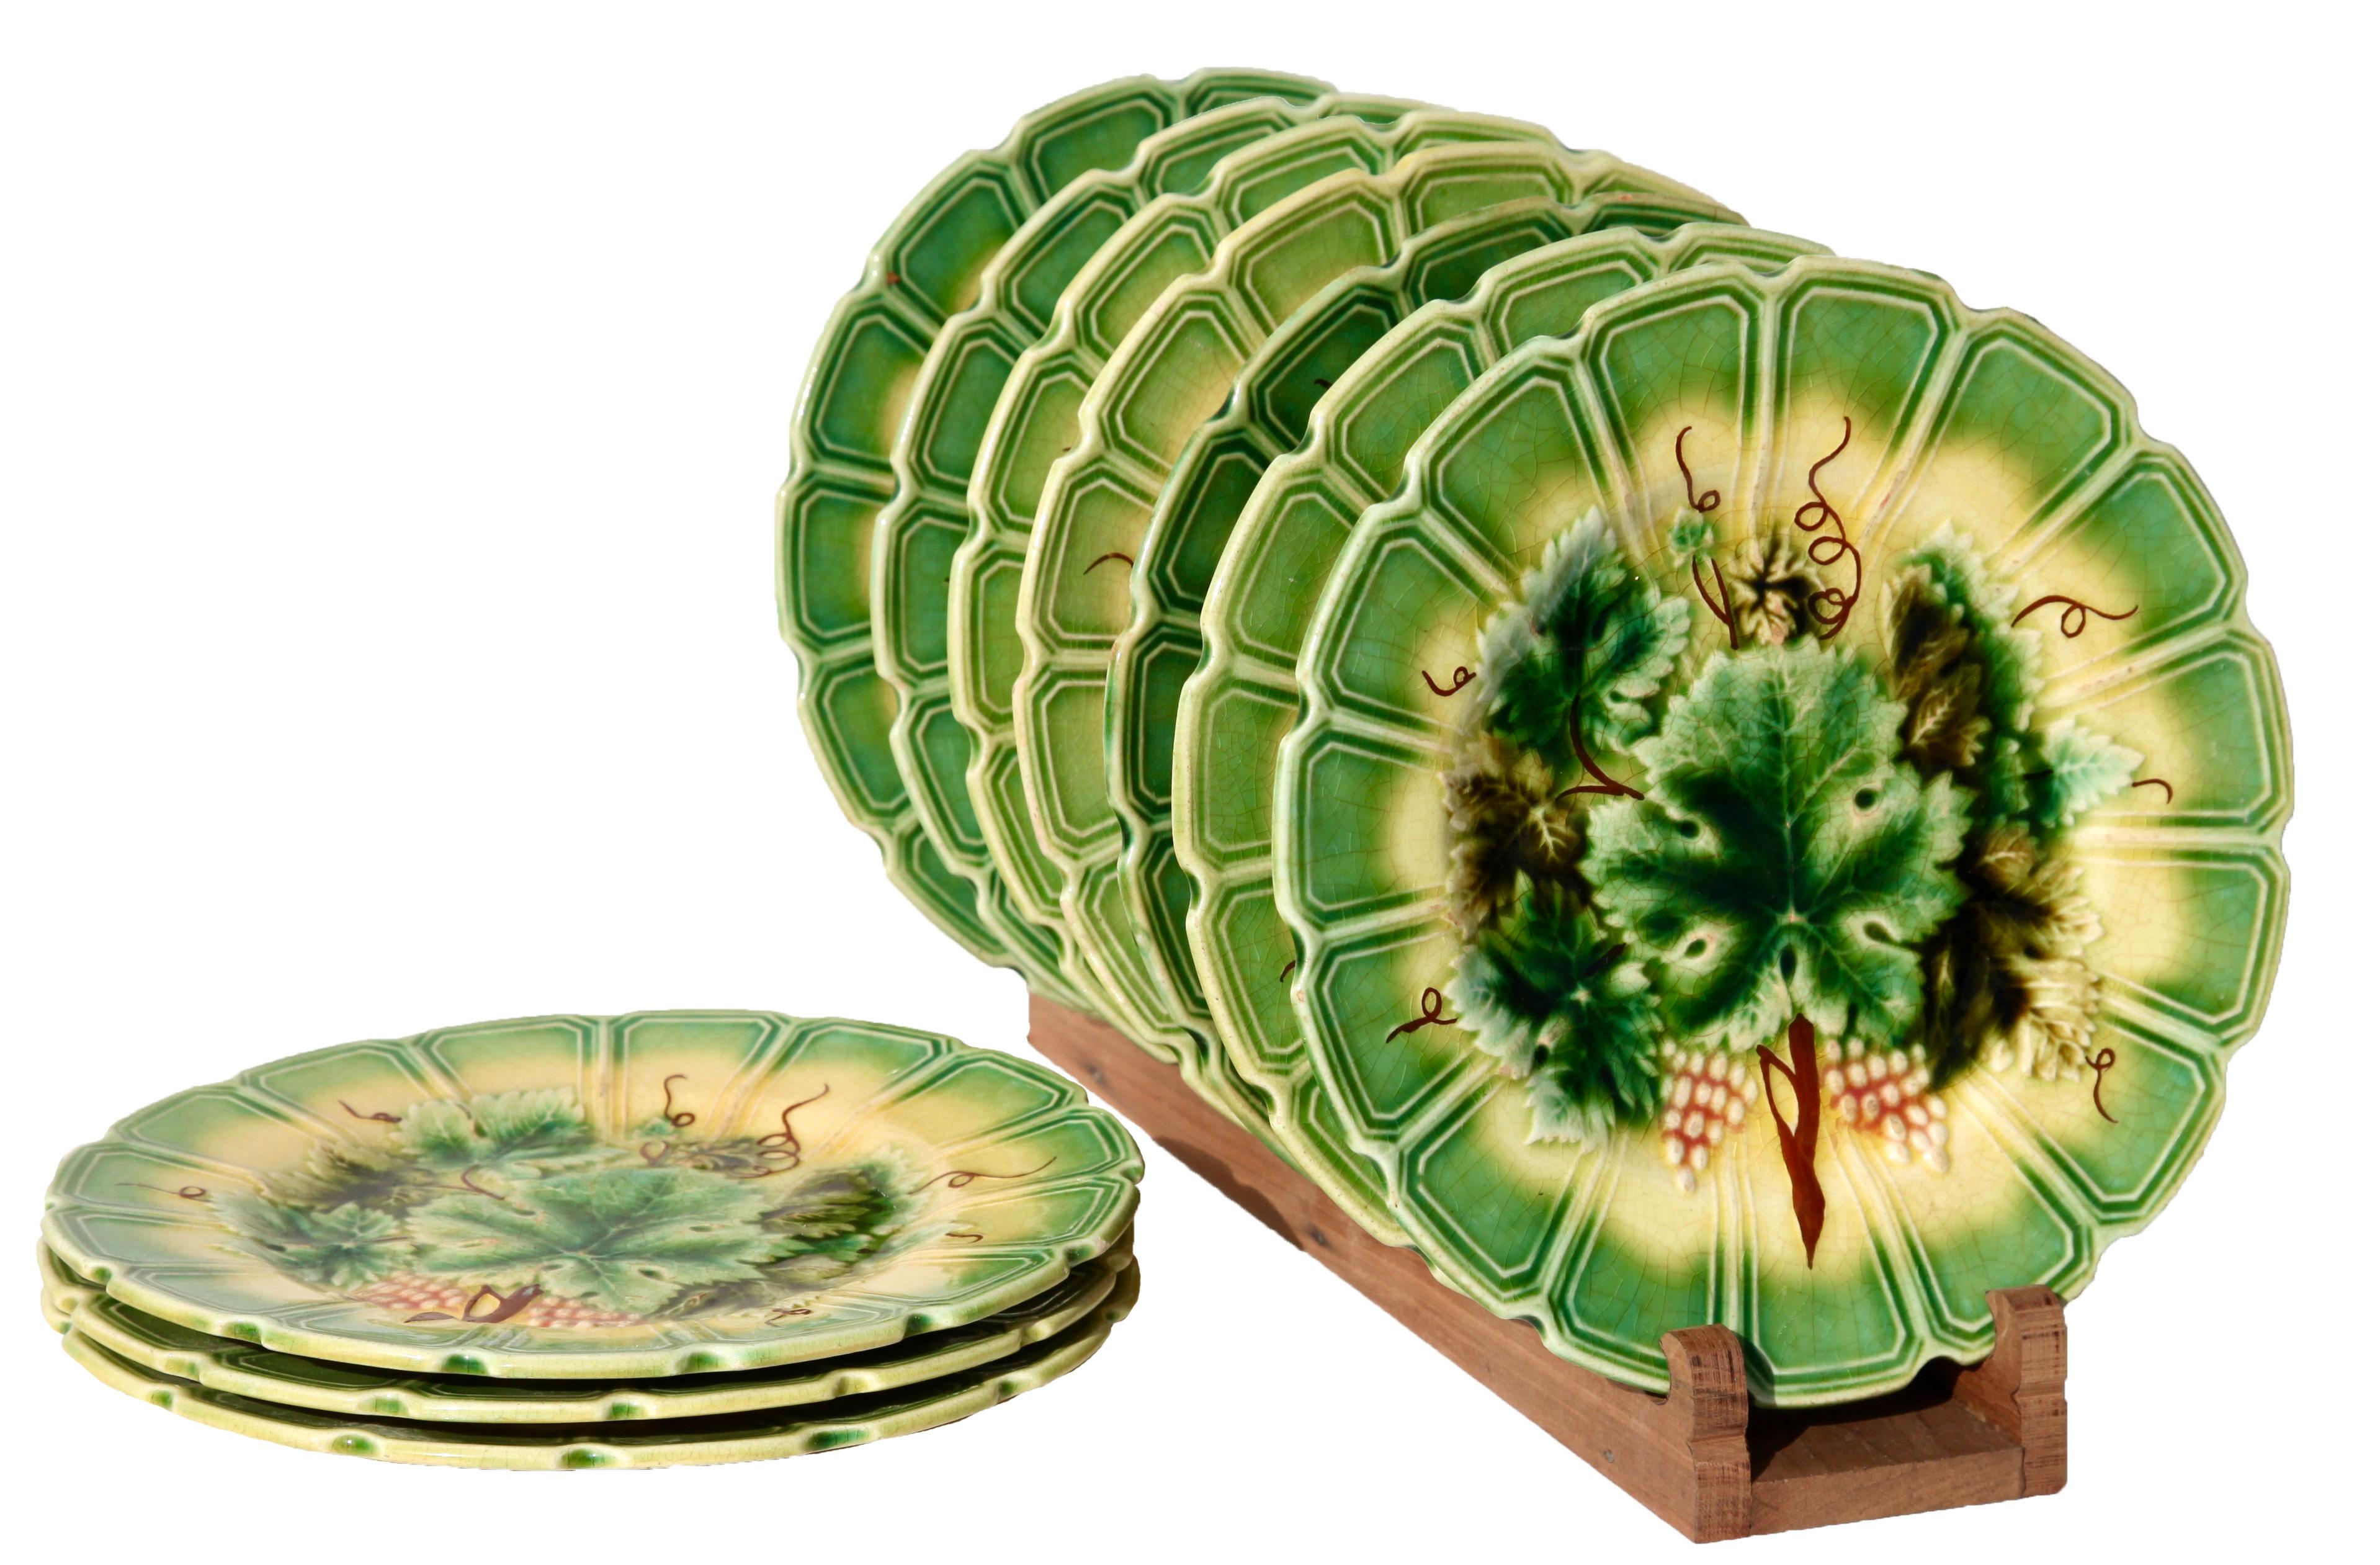 Late 19th Century Art Nouveau Majolica Grapes Pattern Set of 8 Plates Whit SARREGUEMINES Stamp